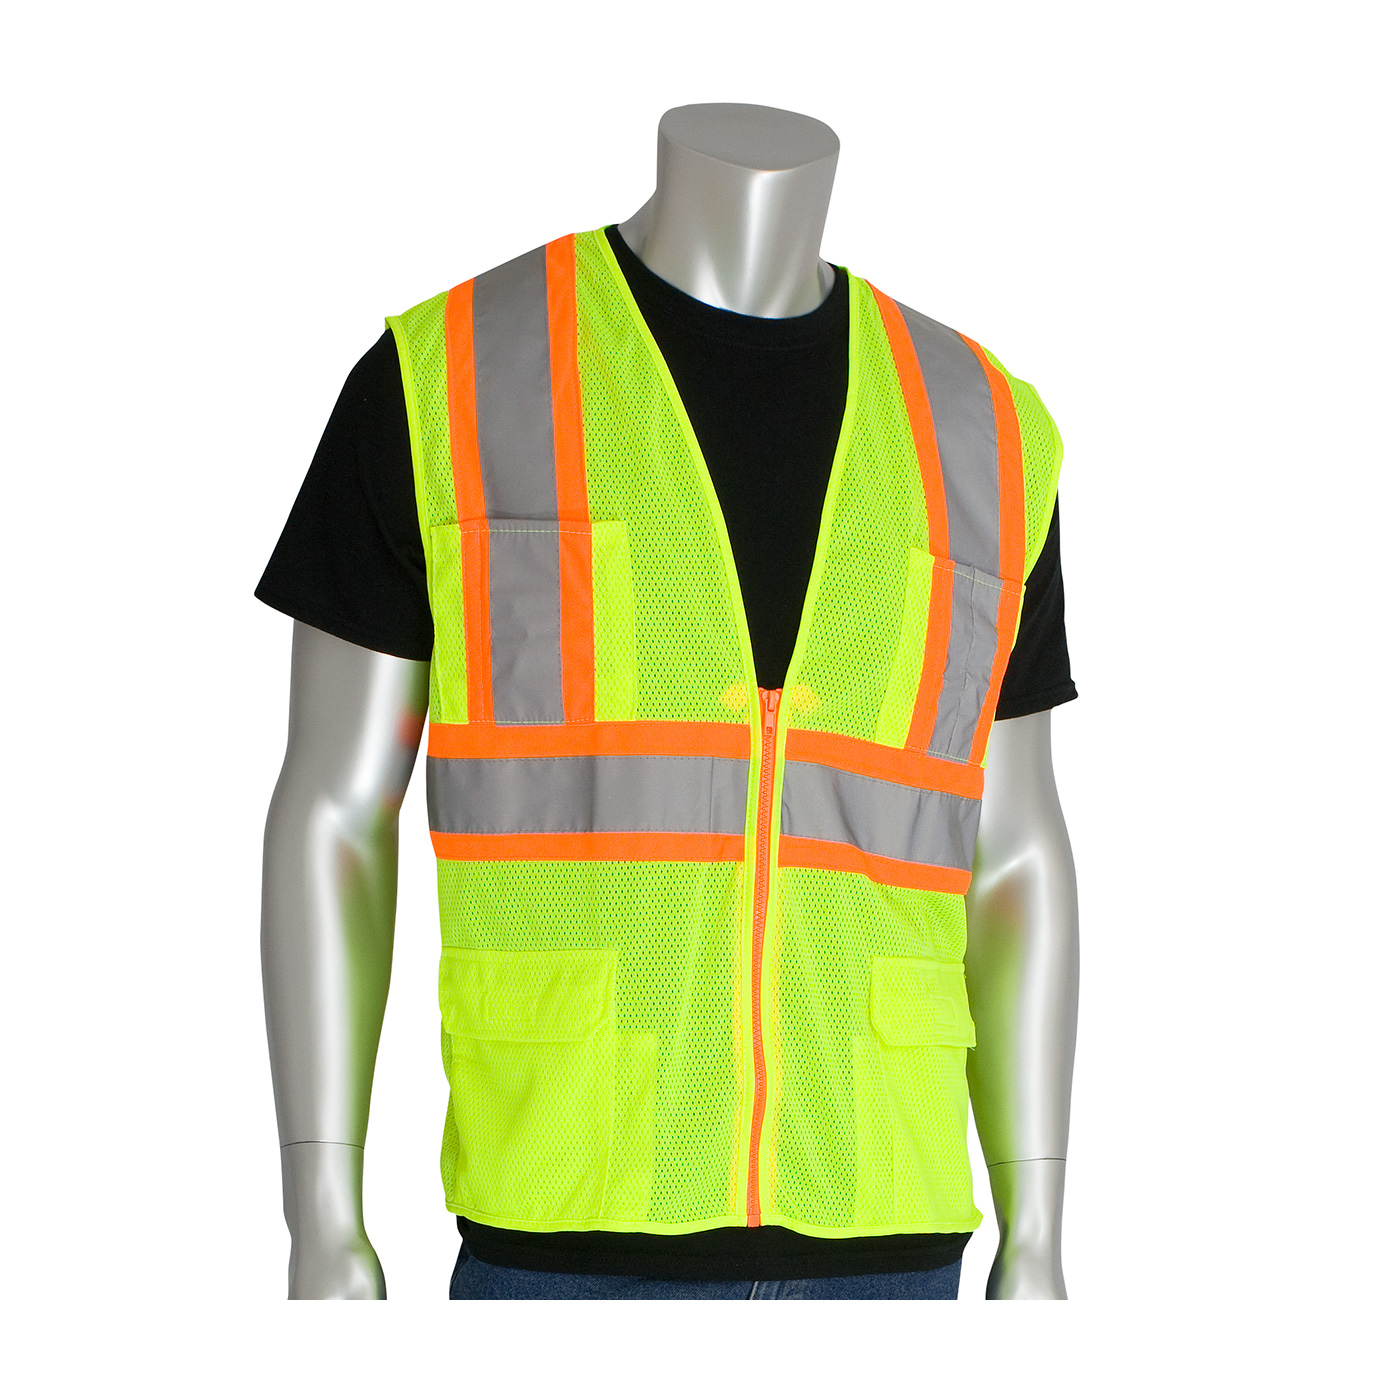 PIP 302-MAPMLY-S ANSI Type R Class 2 Yellow Two-Tone Eleven Pocket Premium Mesh Surveyors Vest - Small PID-302MAPMLYSLITH